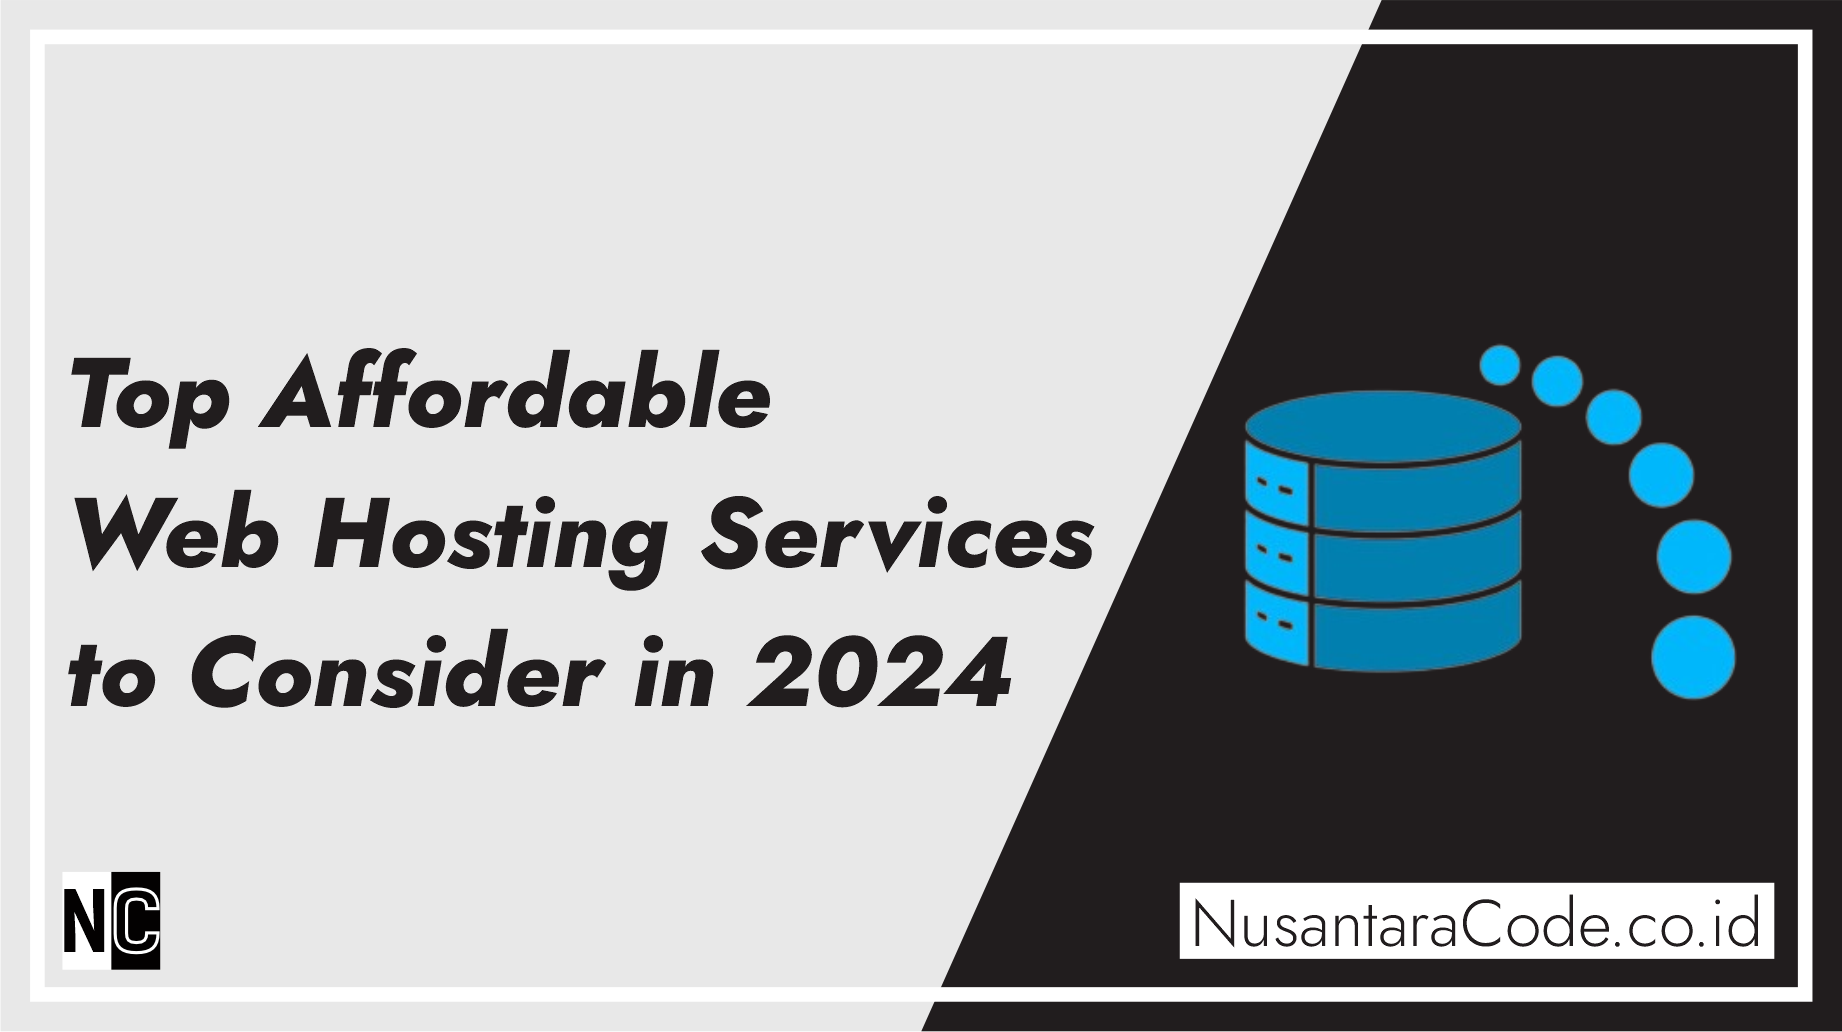 Top Affordable Web Hosting Services to Consider in 2024